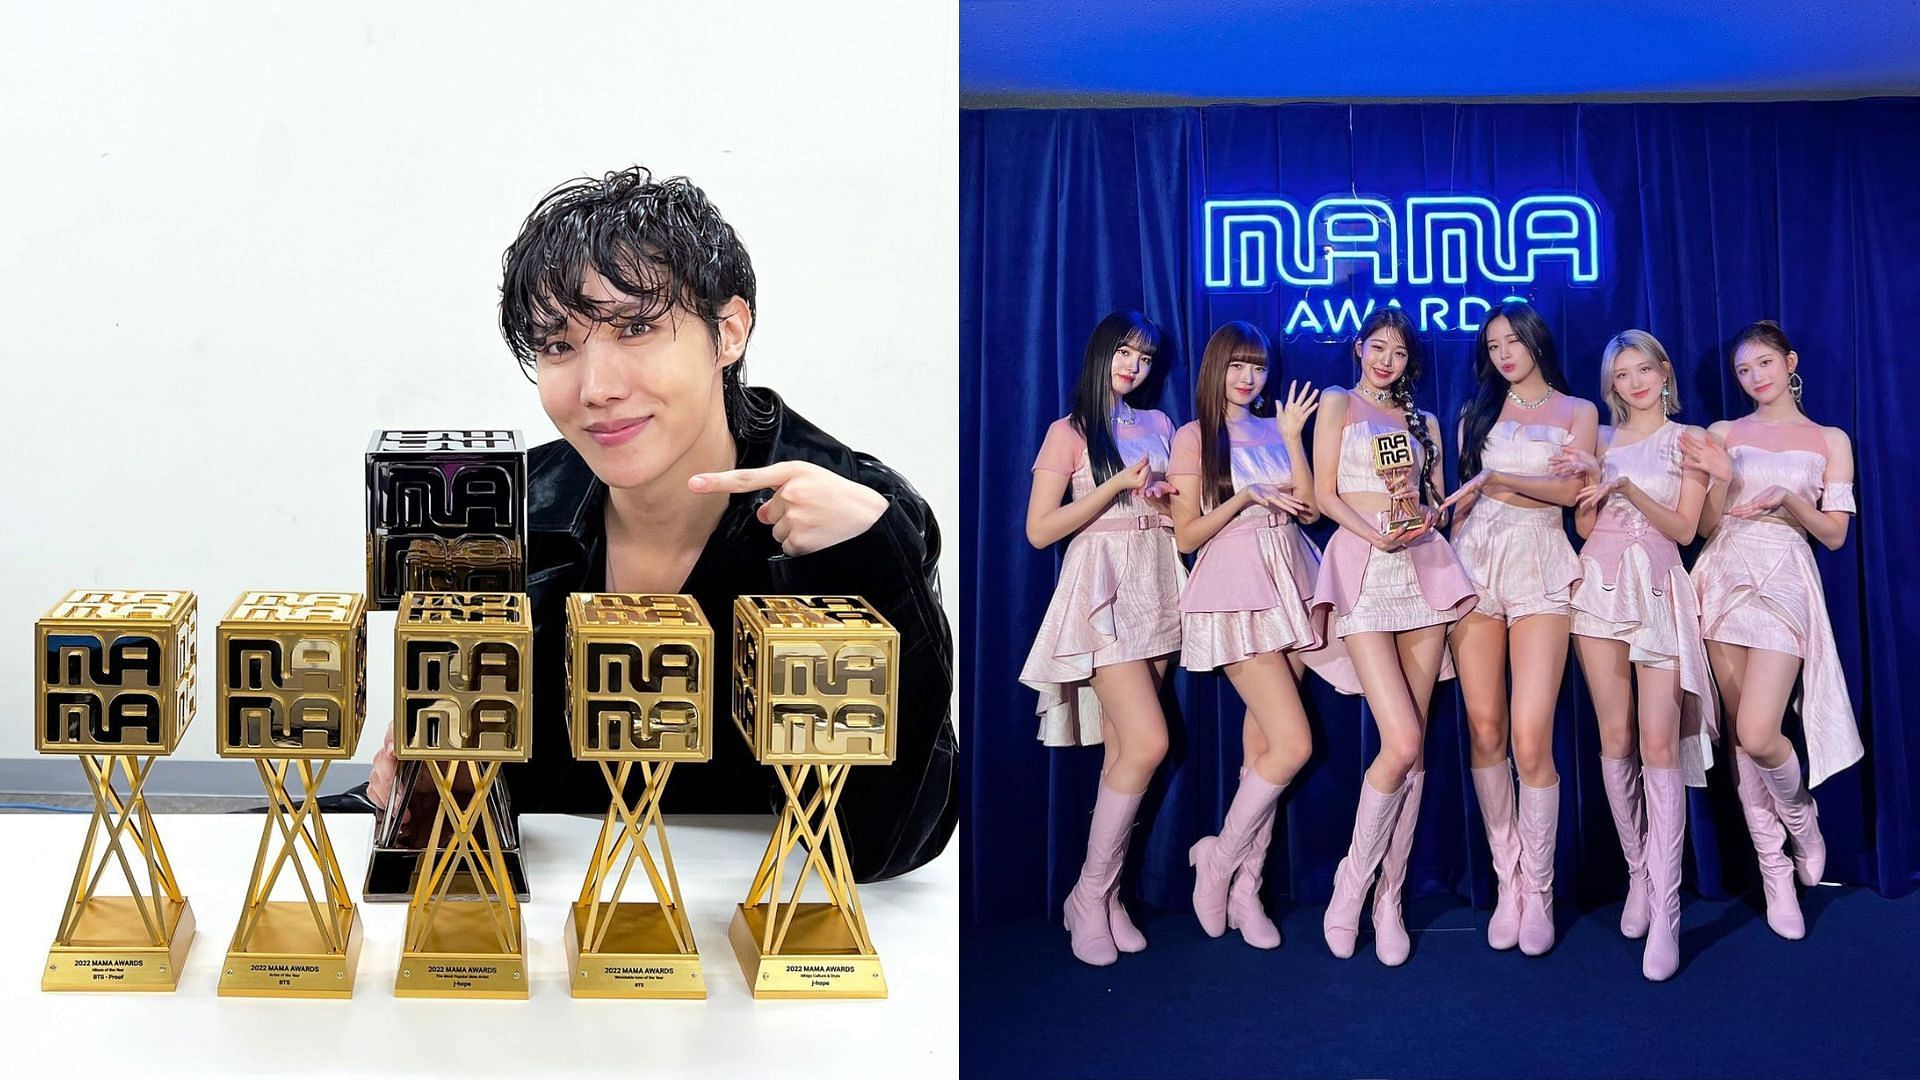 BTS bags several awards and IVE bags three on the second day of the 2022 MAMA Awards (Images via Twitter/bts_bighit and Instagra/ivestarship)